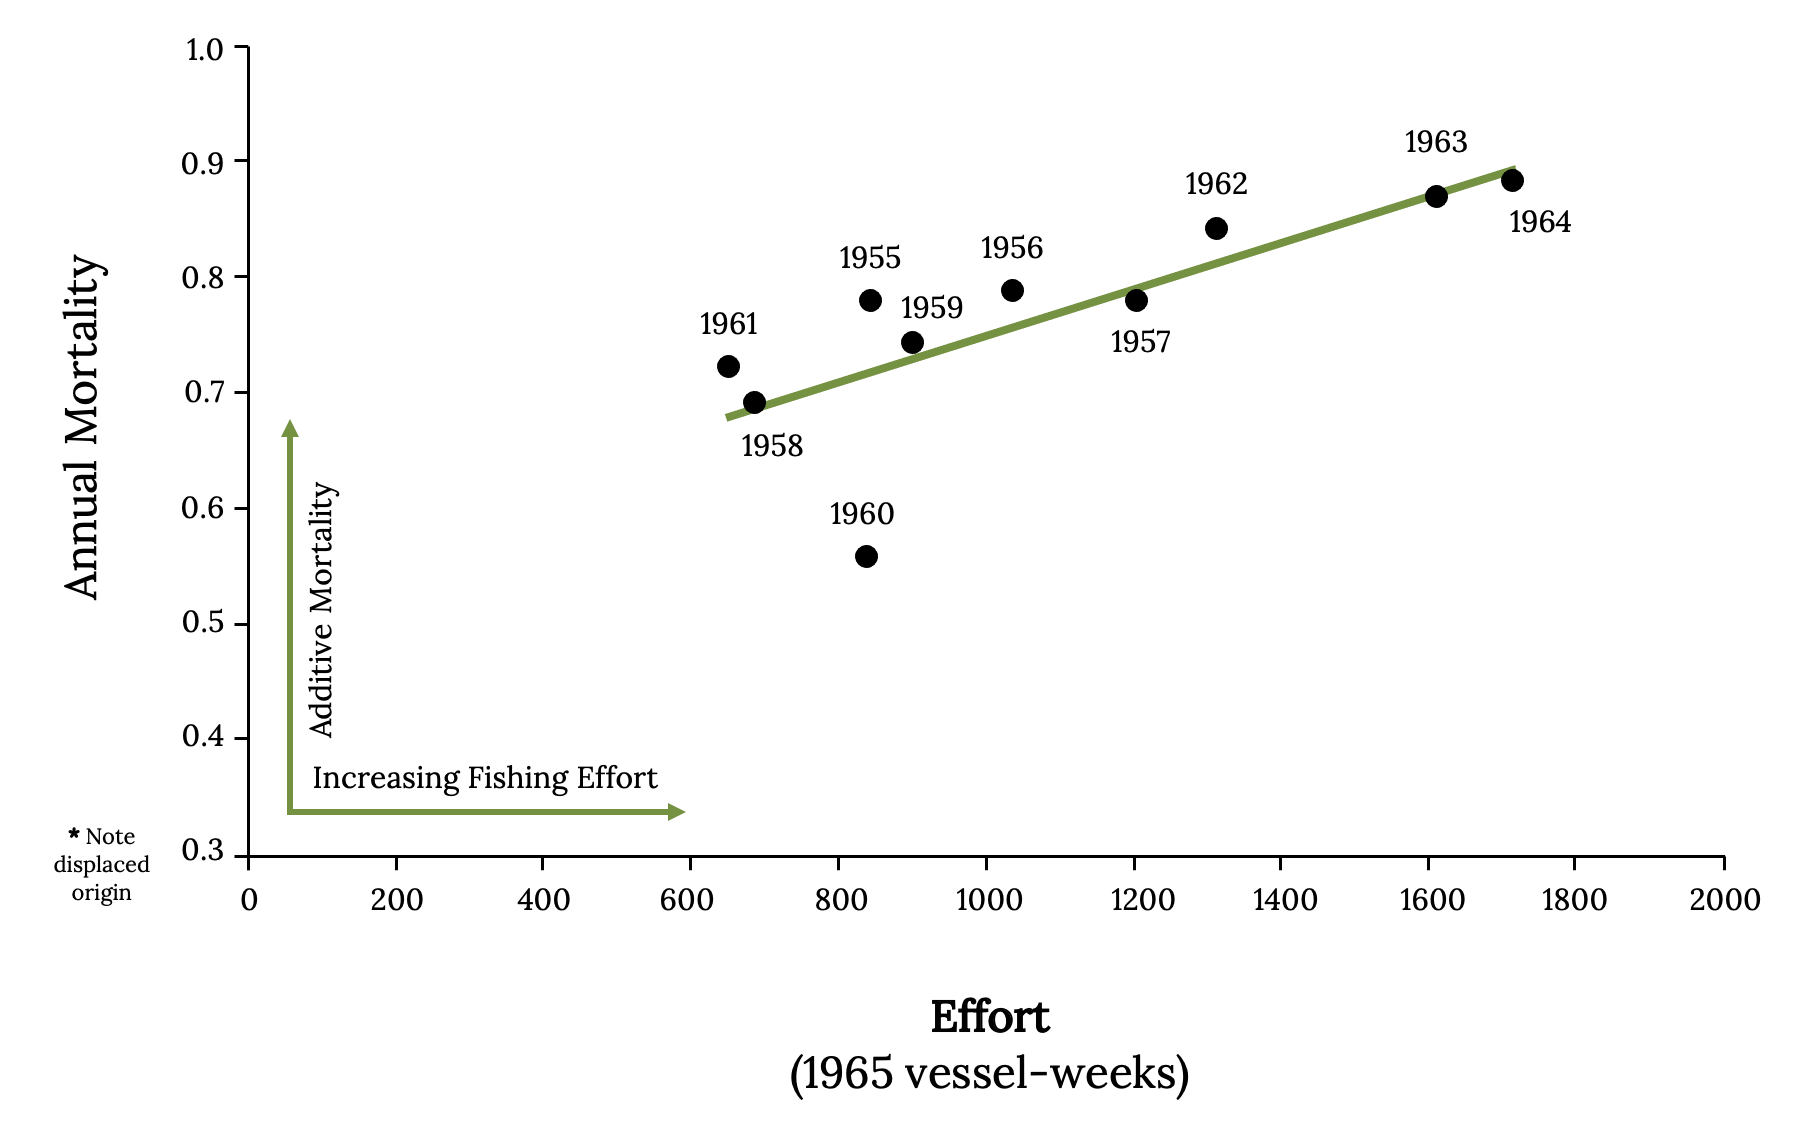 Scatterplot shows as effort increases, annual mortality increases.